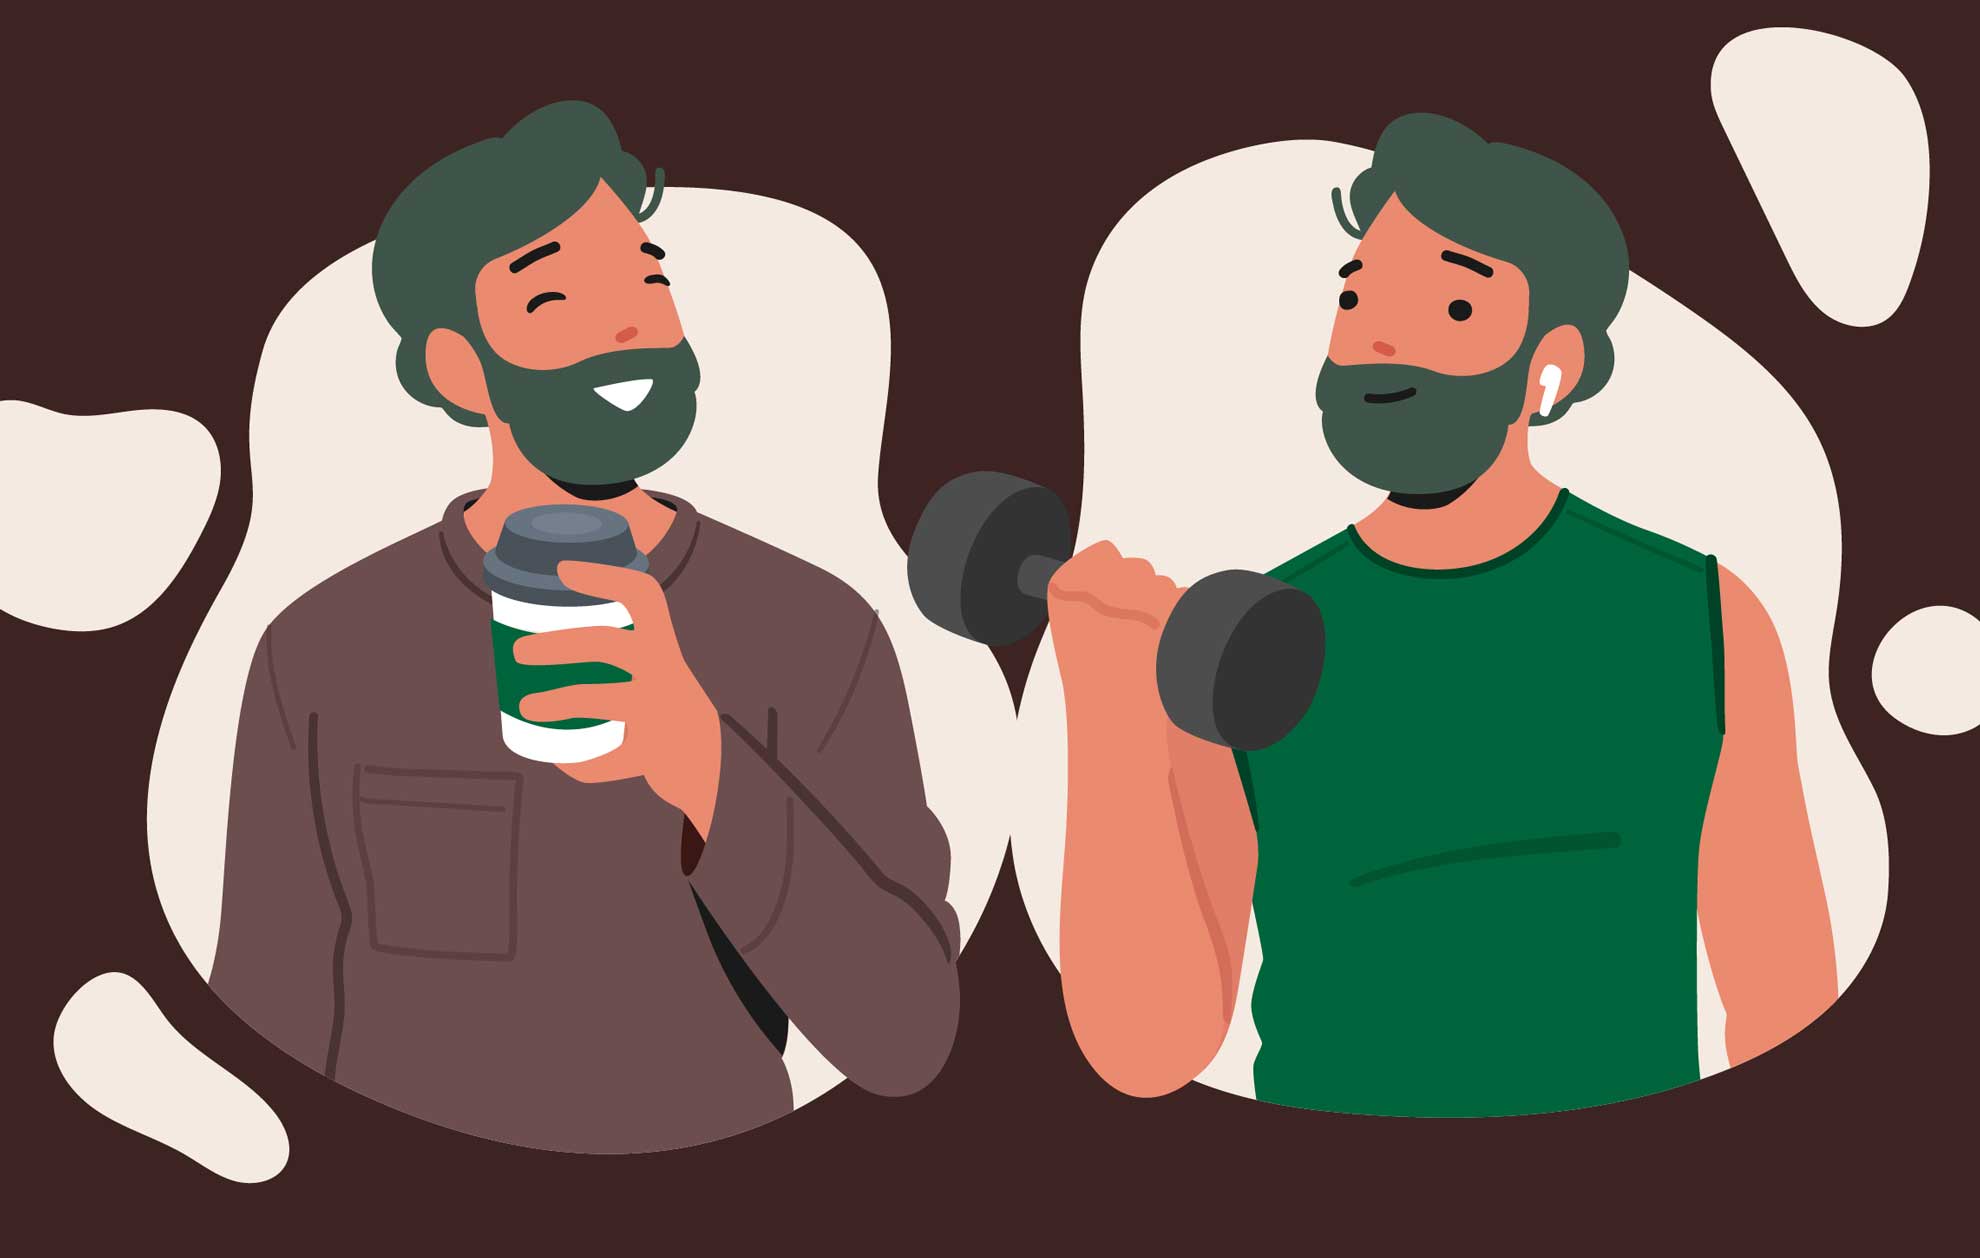 Here’s the skinny on your male Starbucks lovers.